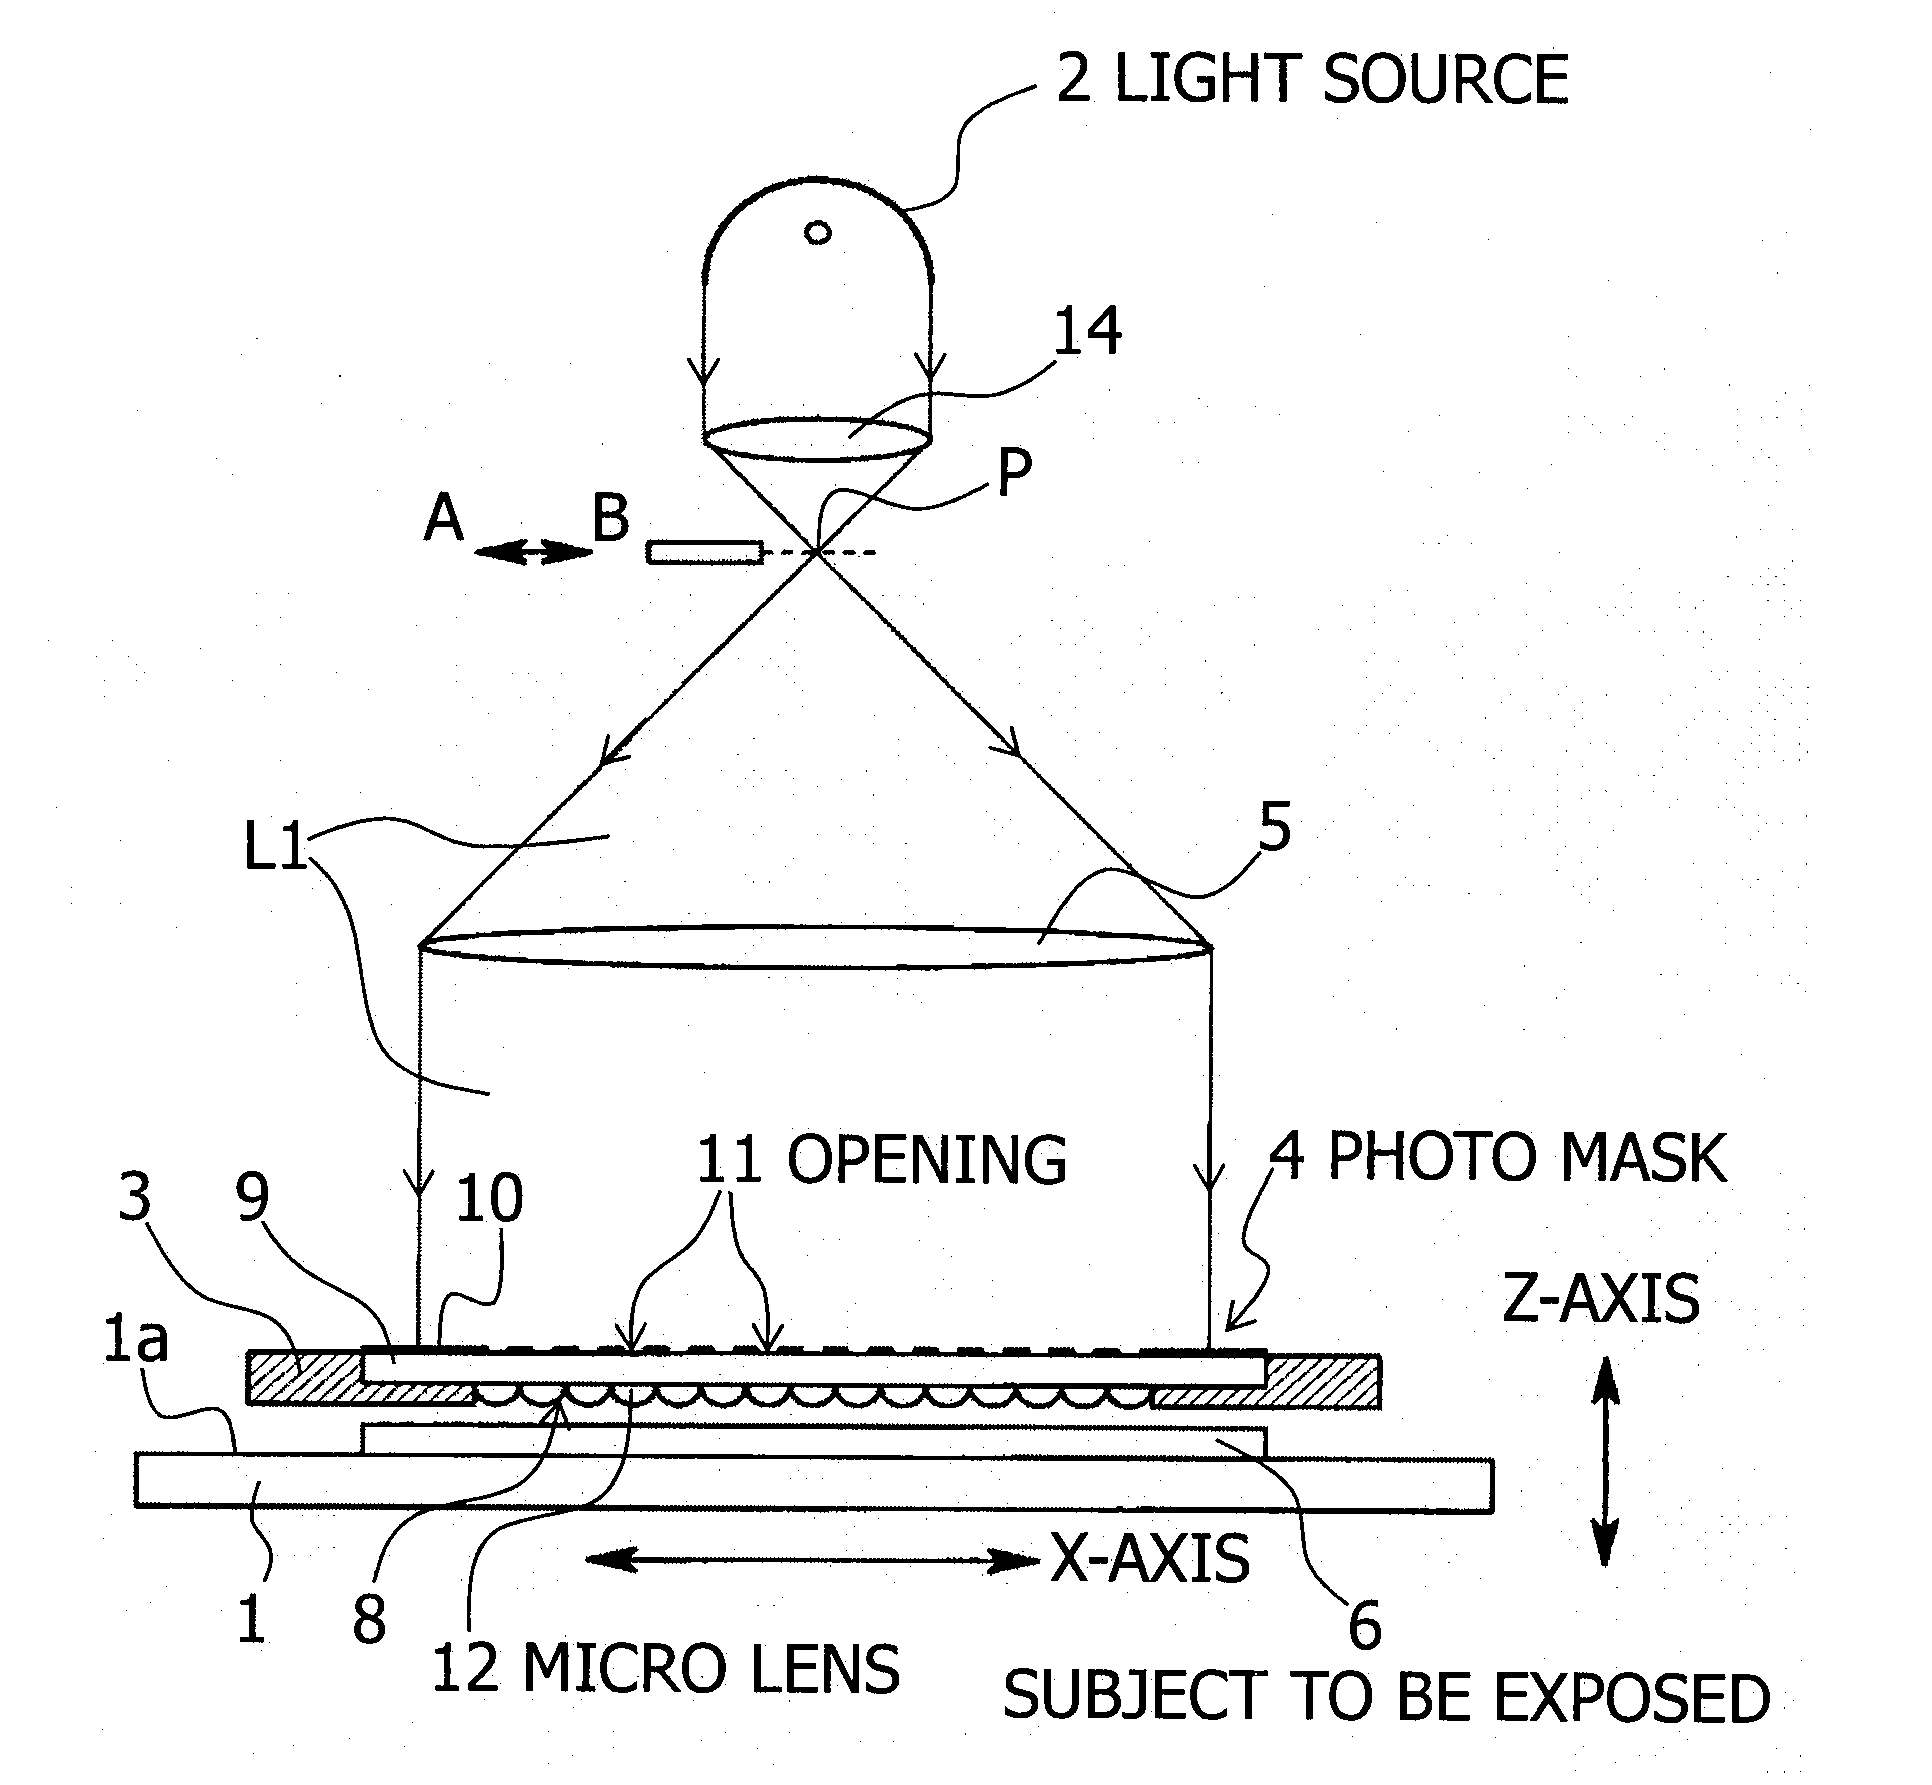 Exposure apparatus and photo mask